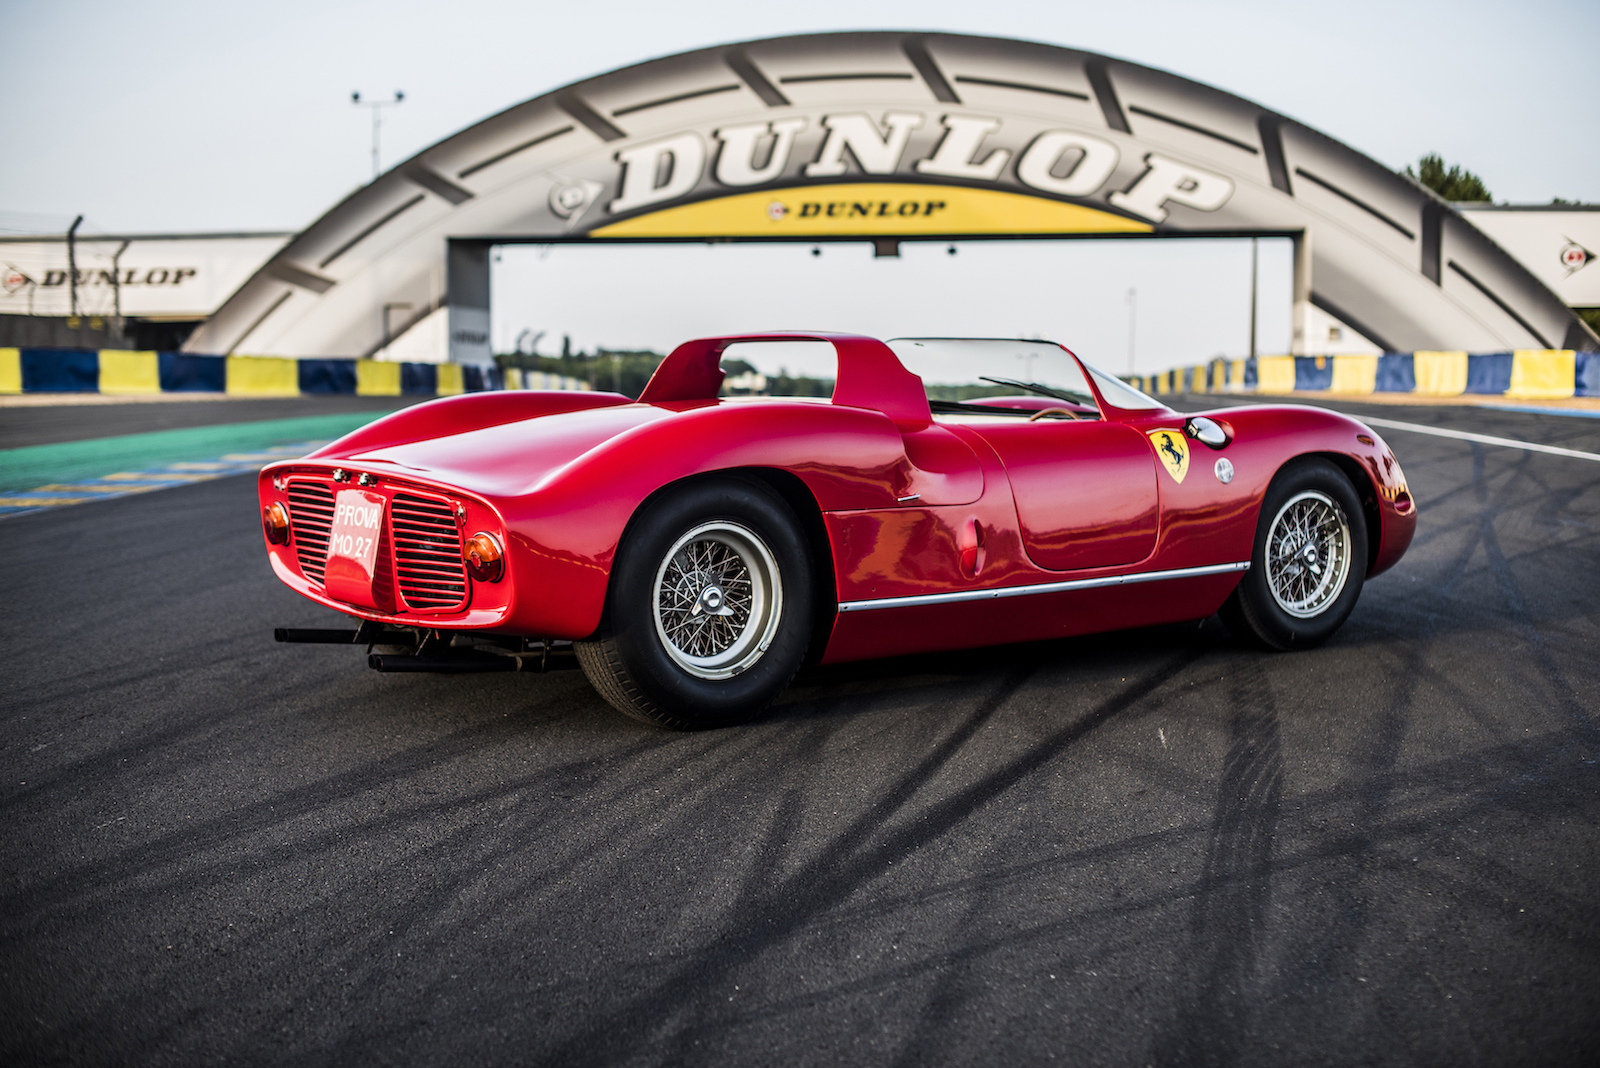 Take to the Road News Two-Time Le Mans Winning 1963 Ferrari 275 P offered for Private Sale